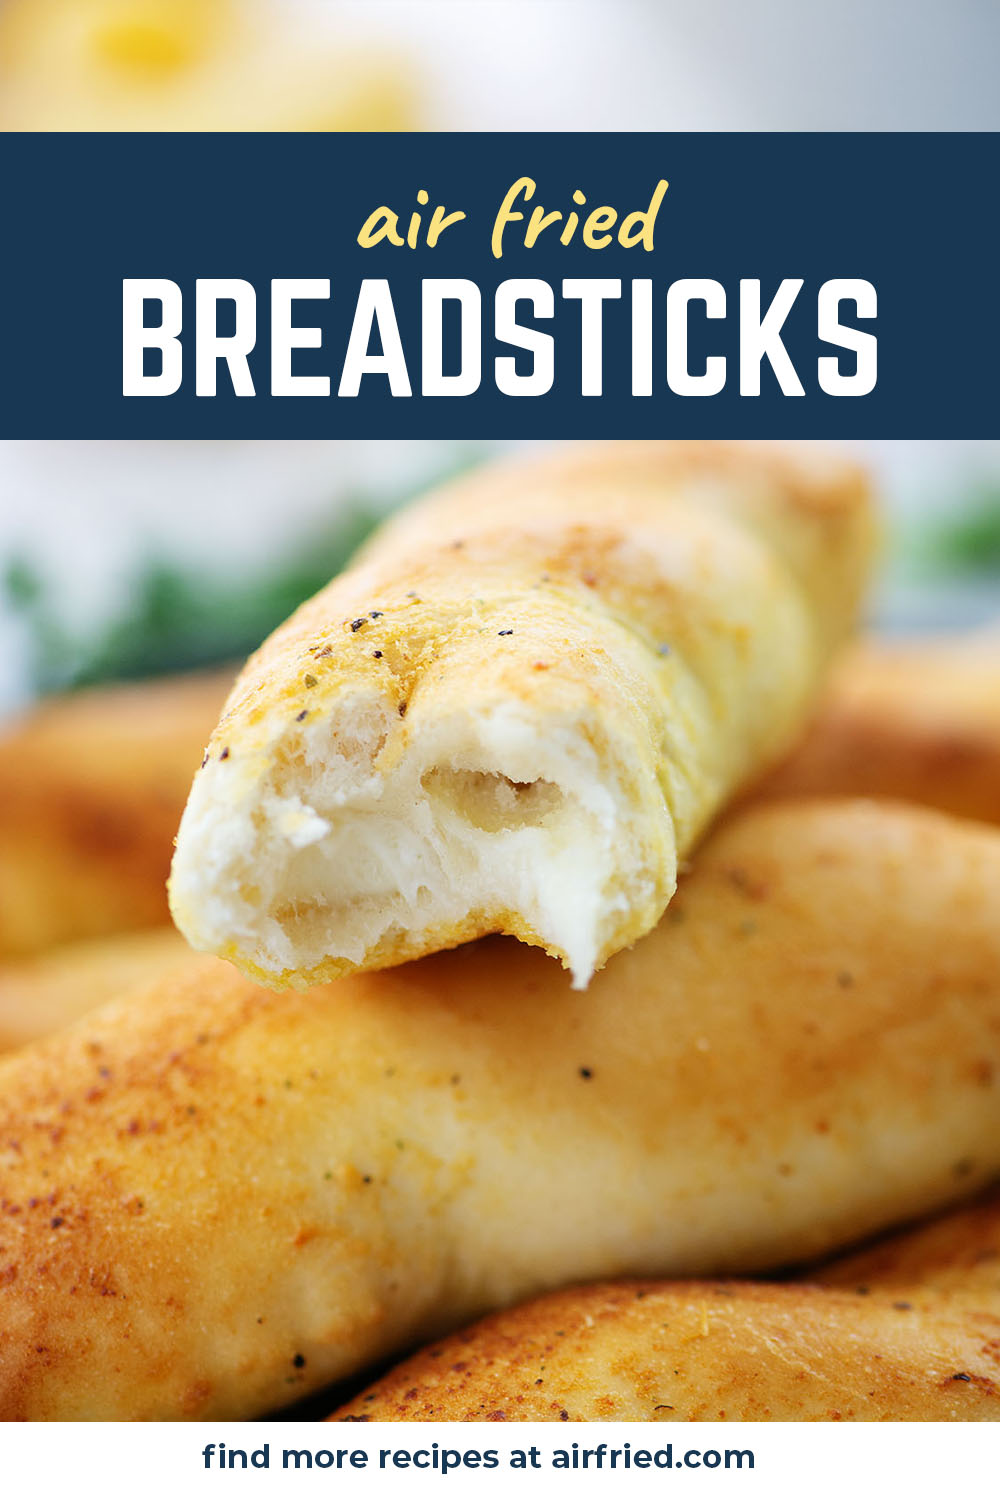 The ease and taste of frozen breadsticks that were air fried is too good to pass up!